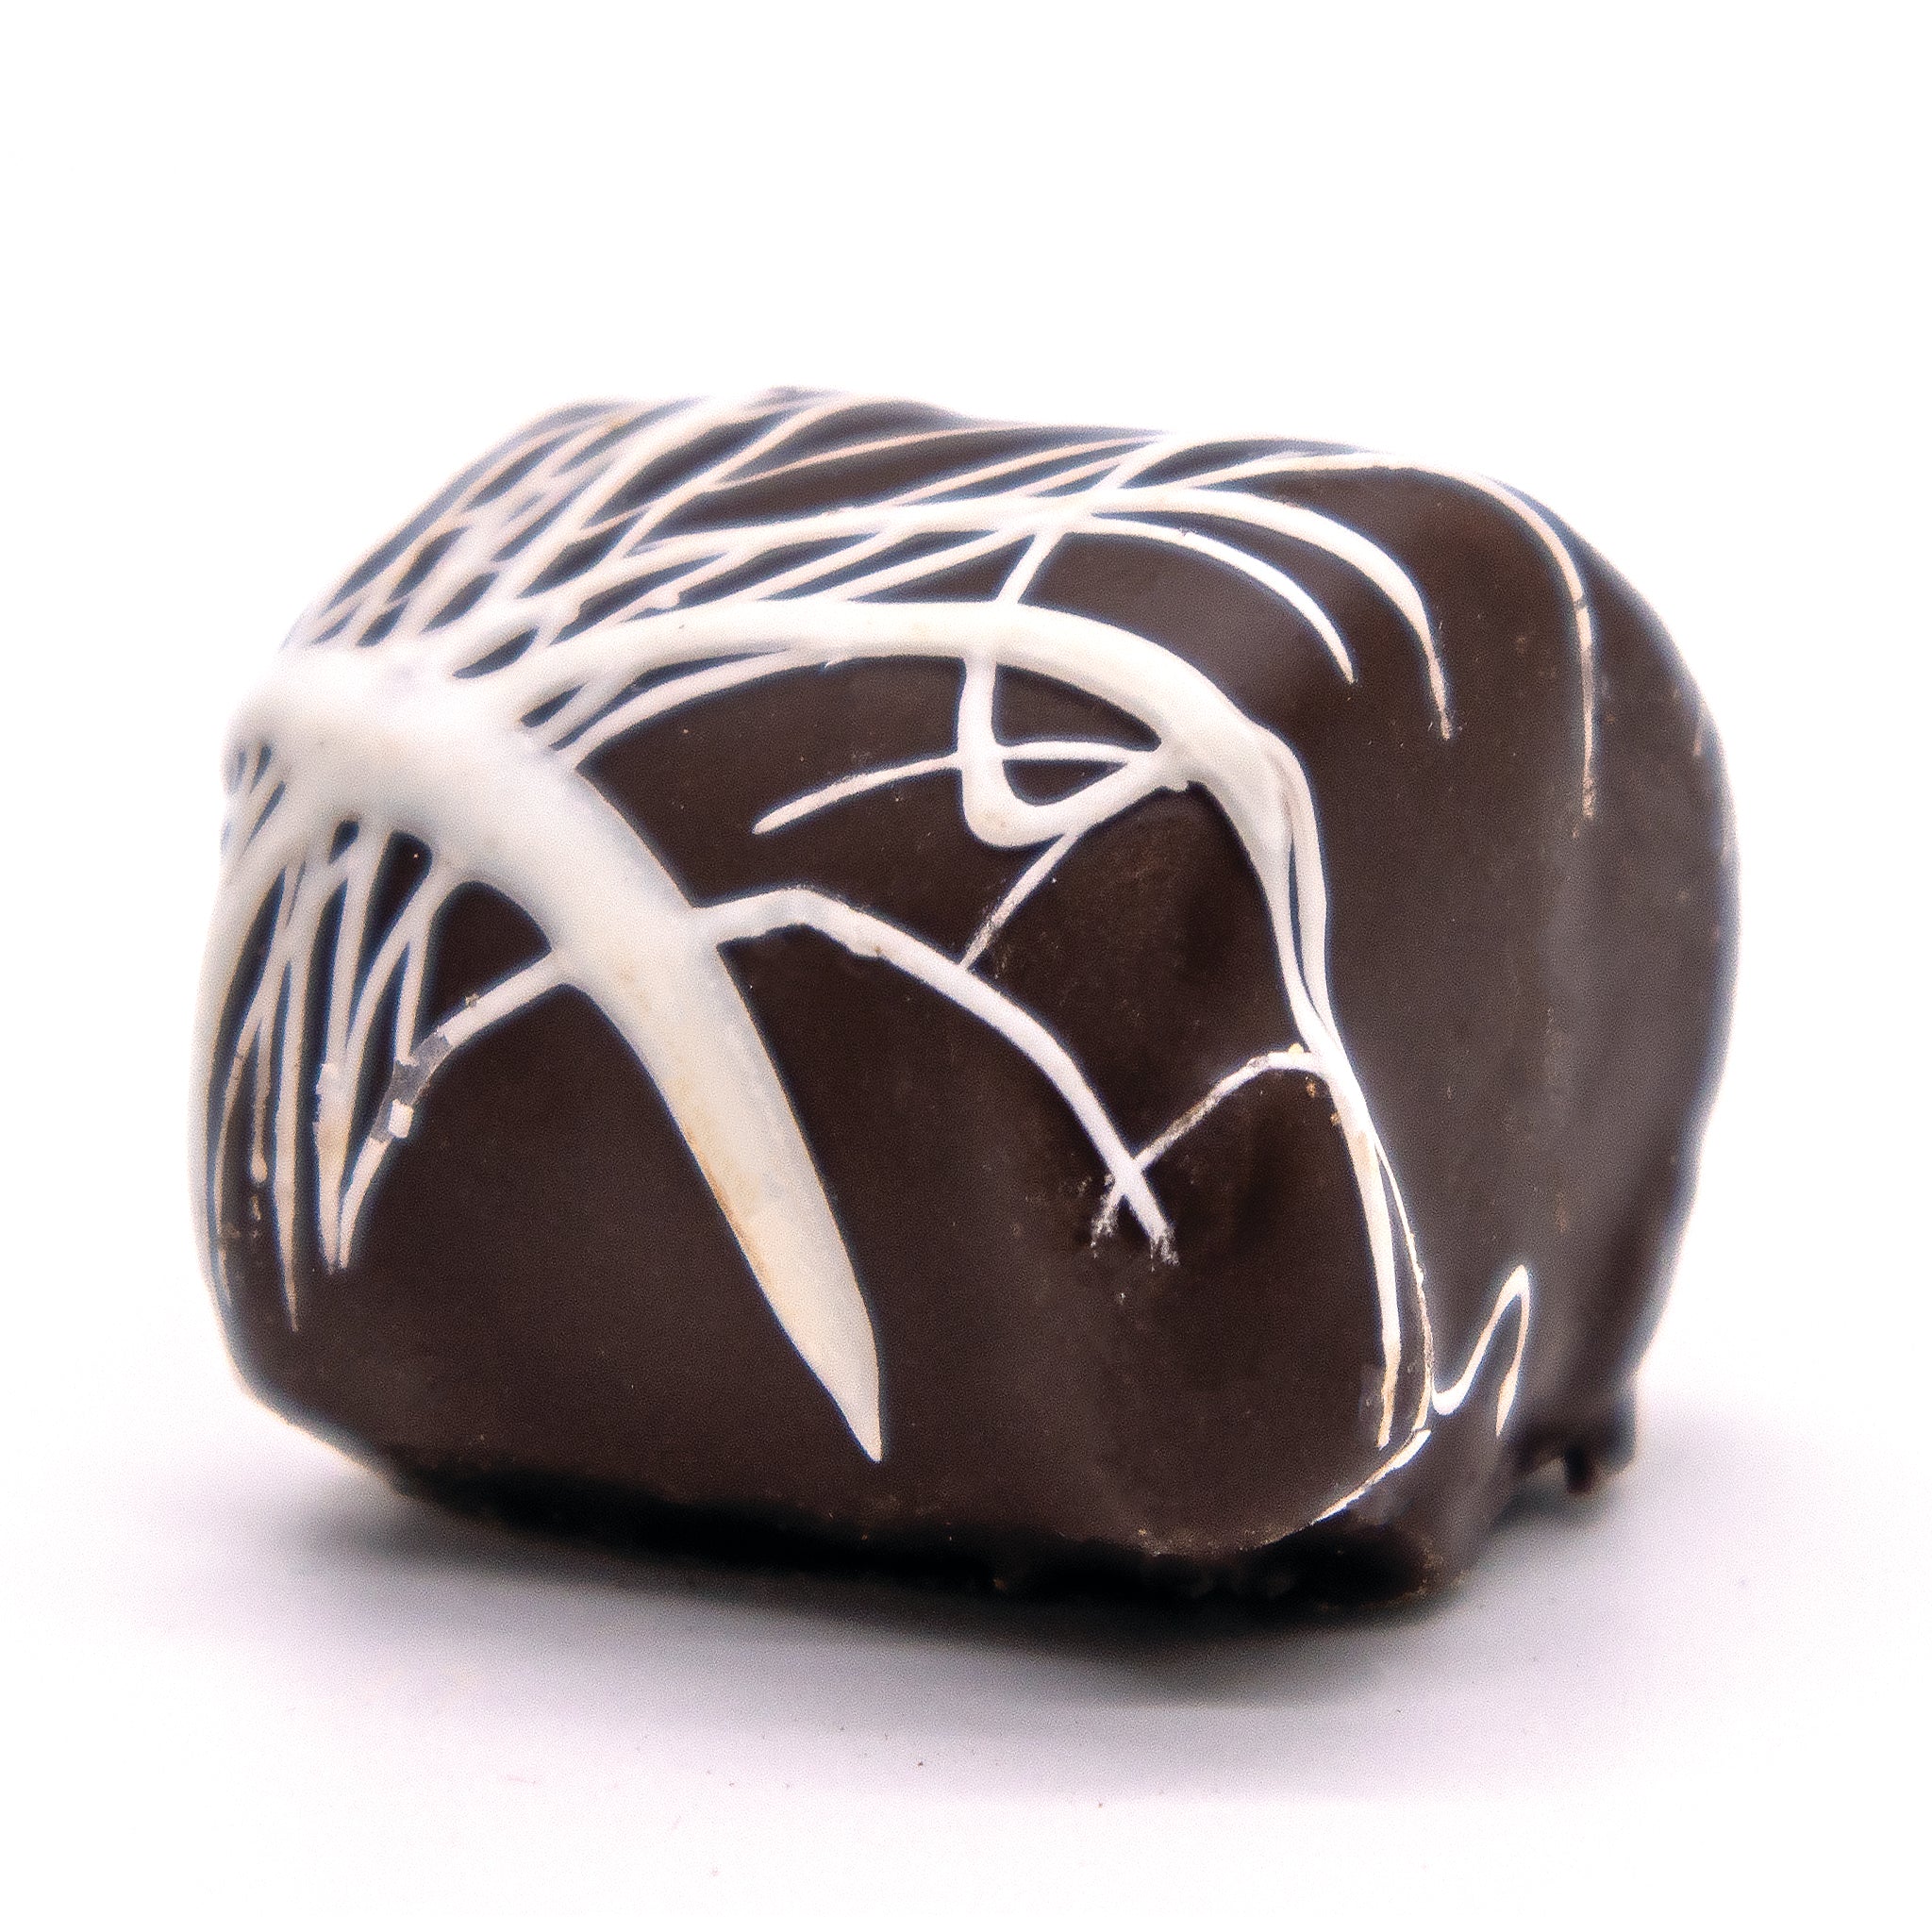 Chocolate Covered Big Mallow - White Stringed - 2 Lb.